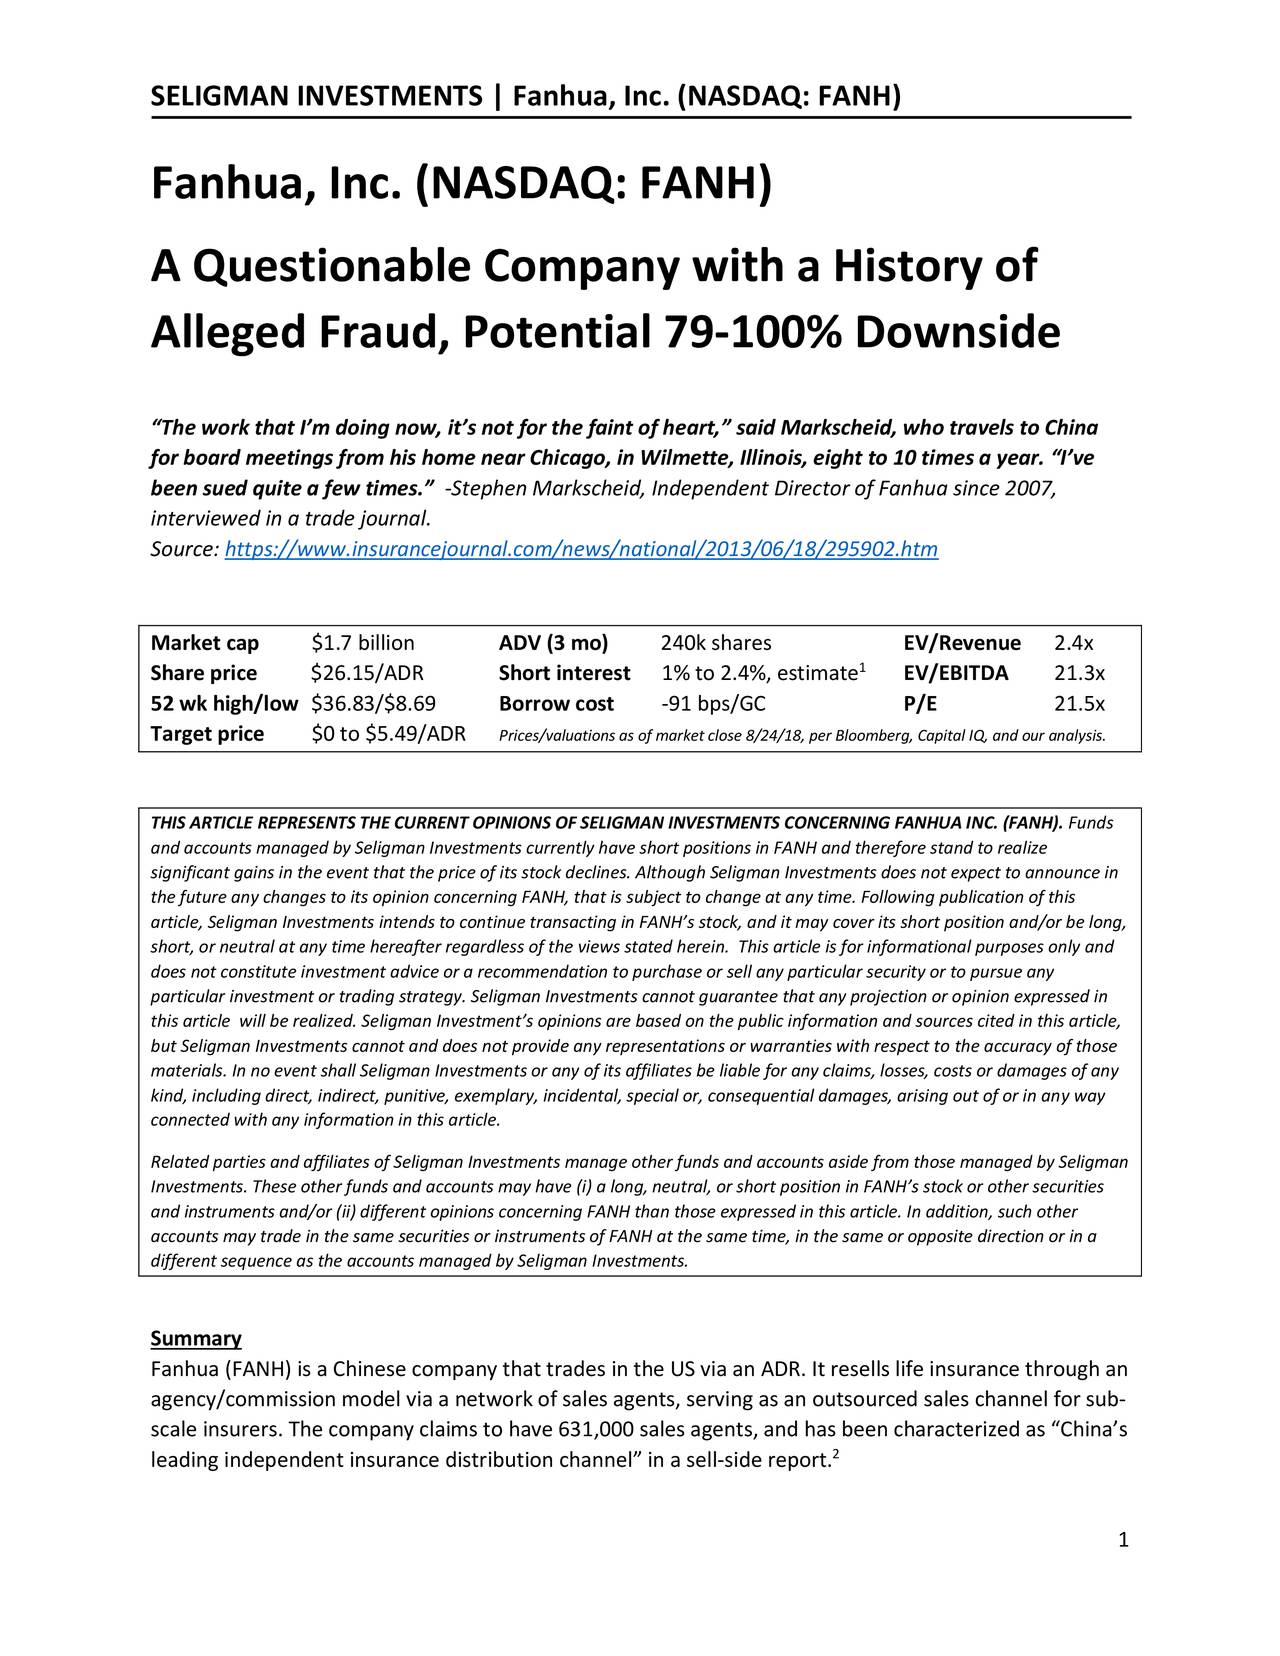 Fanhua, Inc.: A Questionable Company With A History Of Alleged Fraud, Potential 79-100 ...